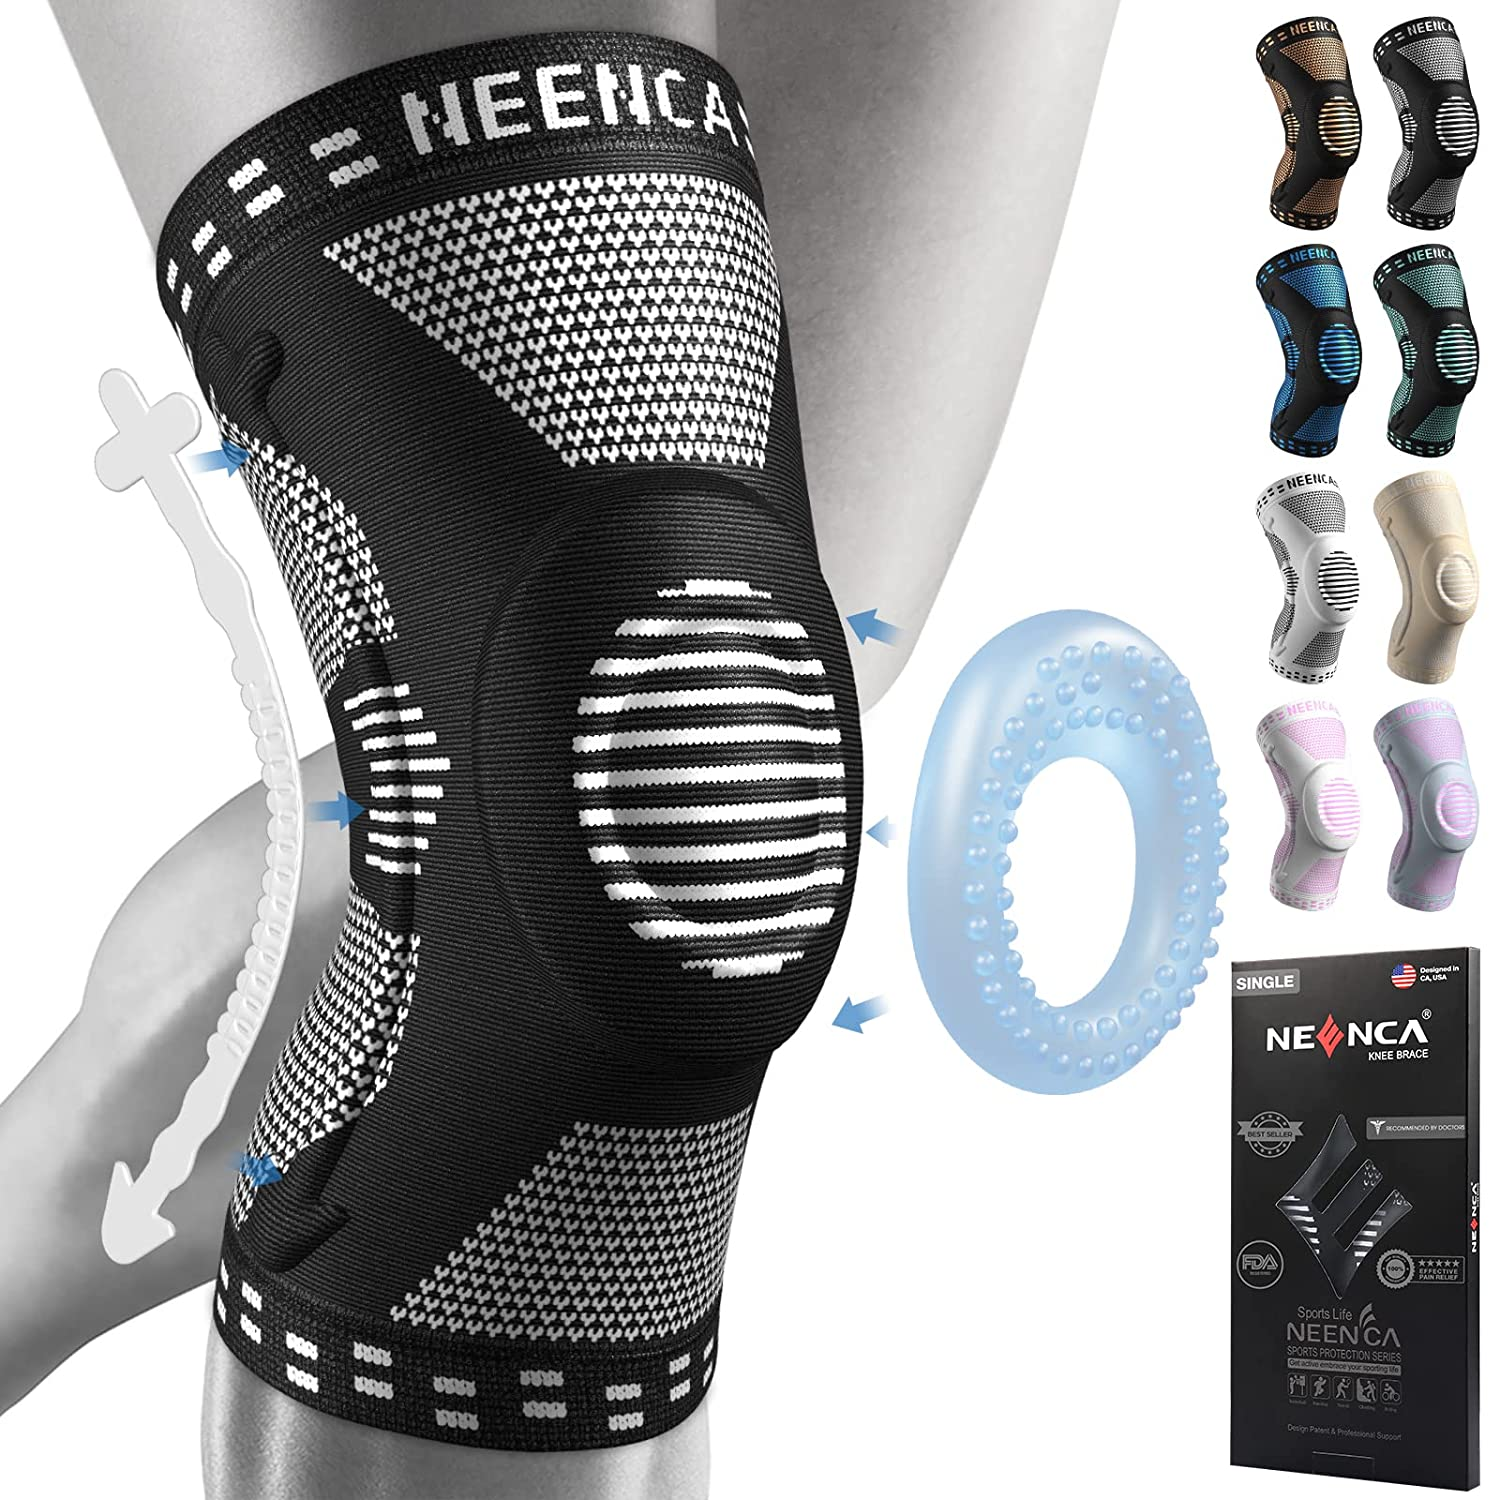 PRO Compression - Calf Compression Sleeve for Pain Relief, Unisex